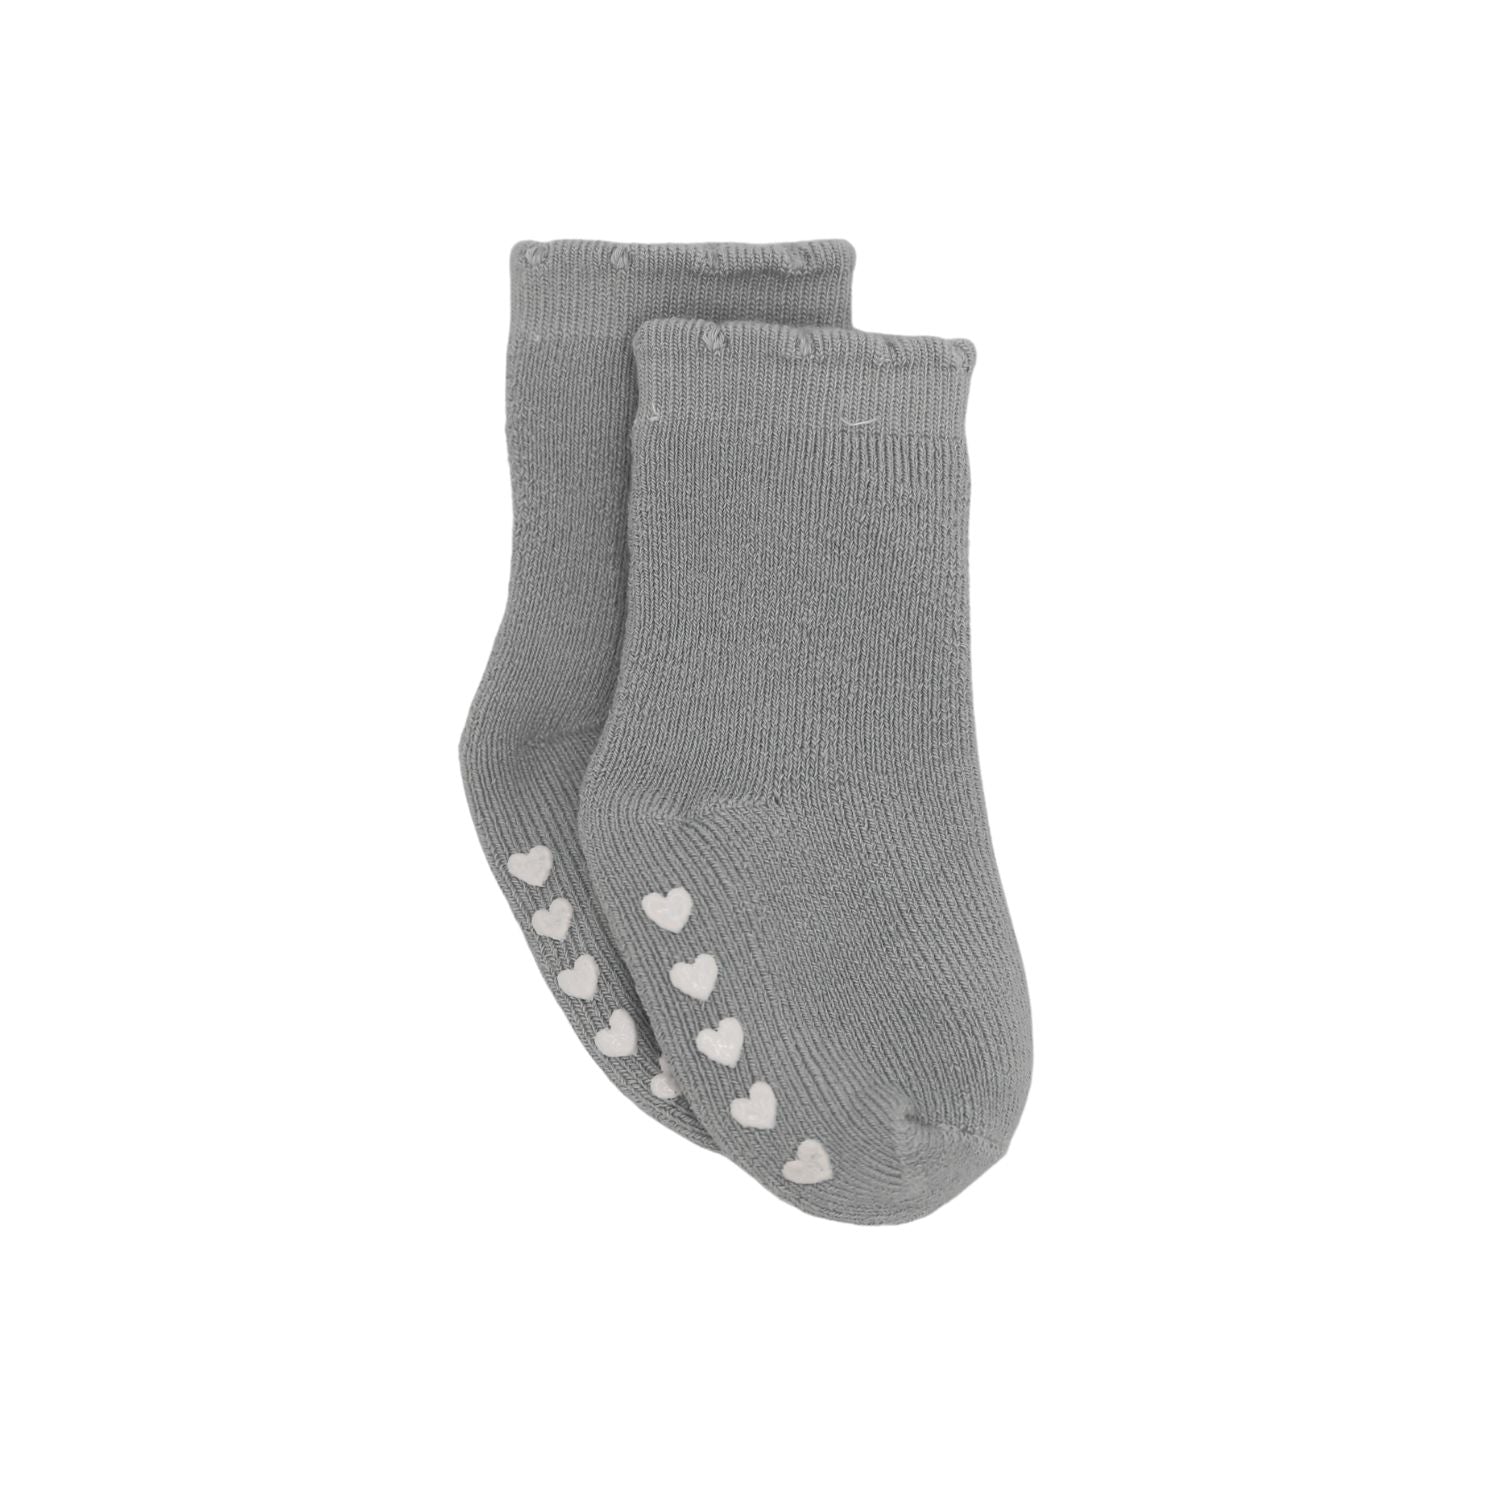 The Baby Cubby Scalloped Heart Grip Socks - Grey